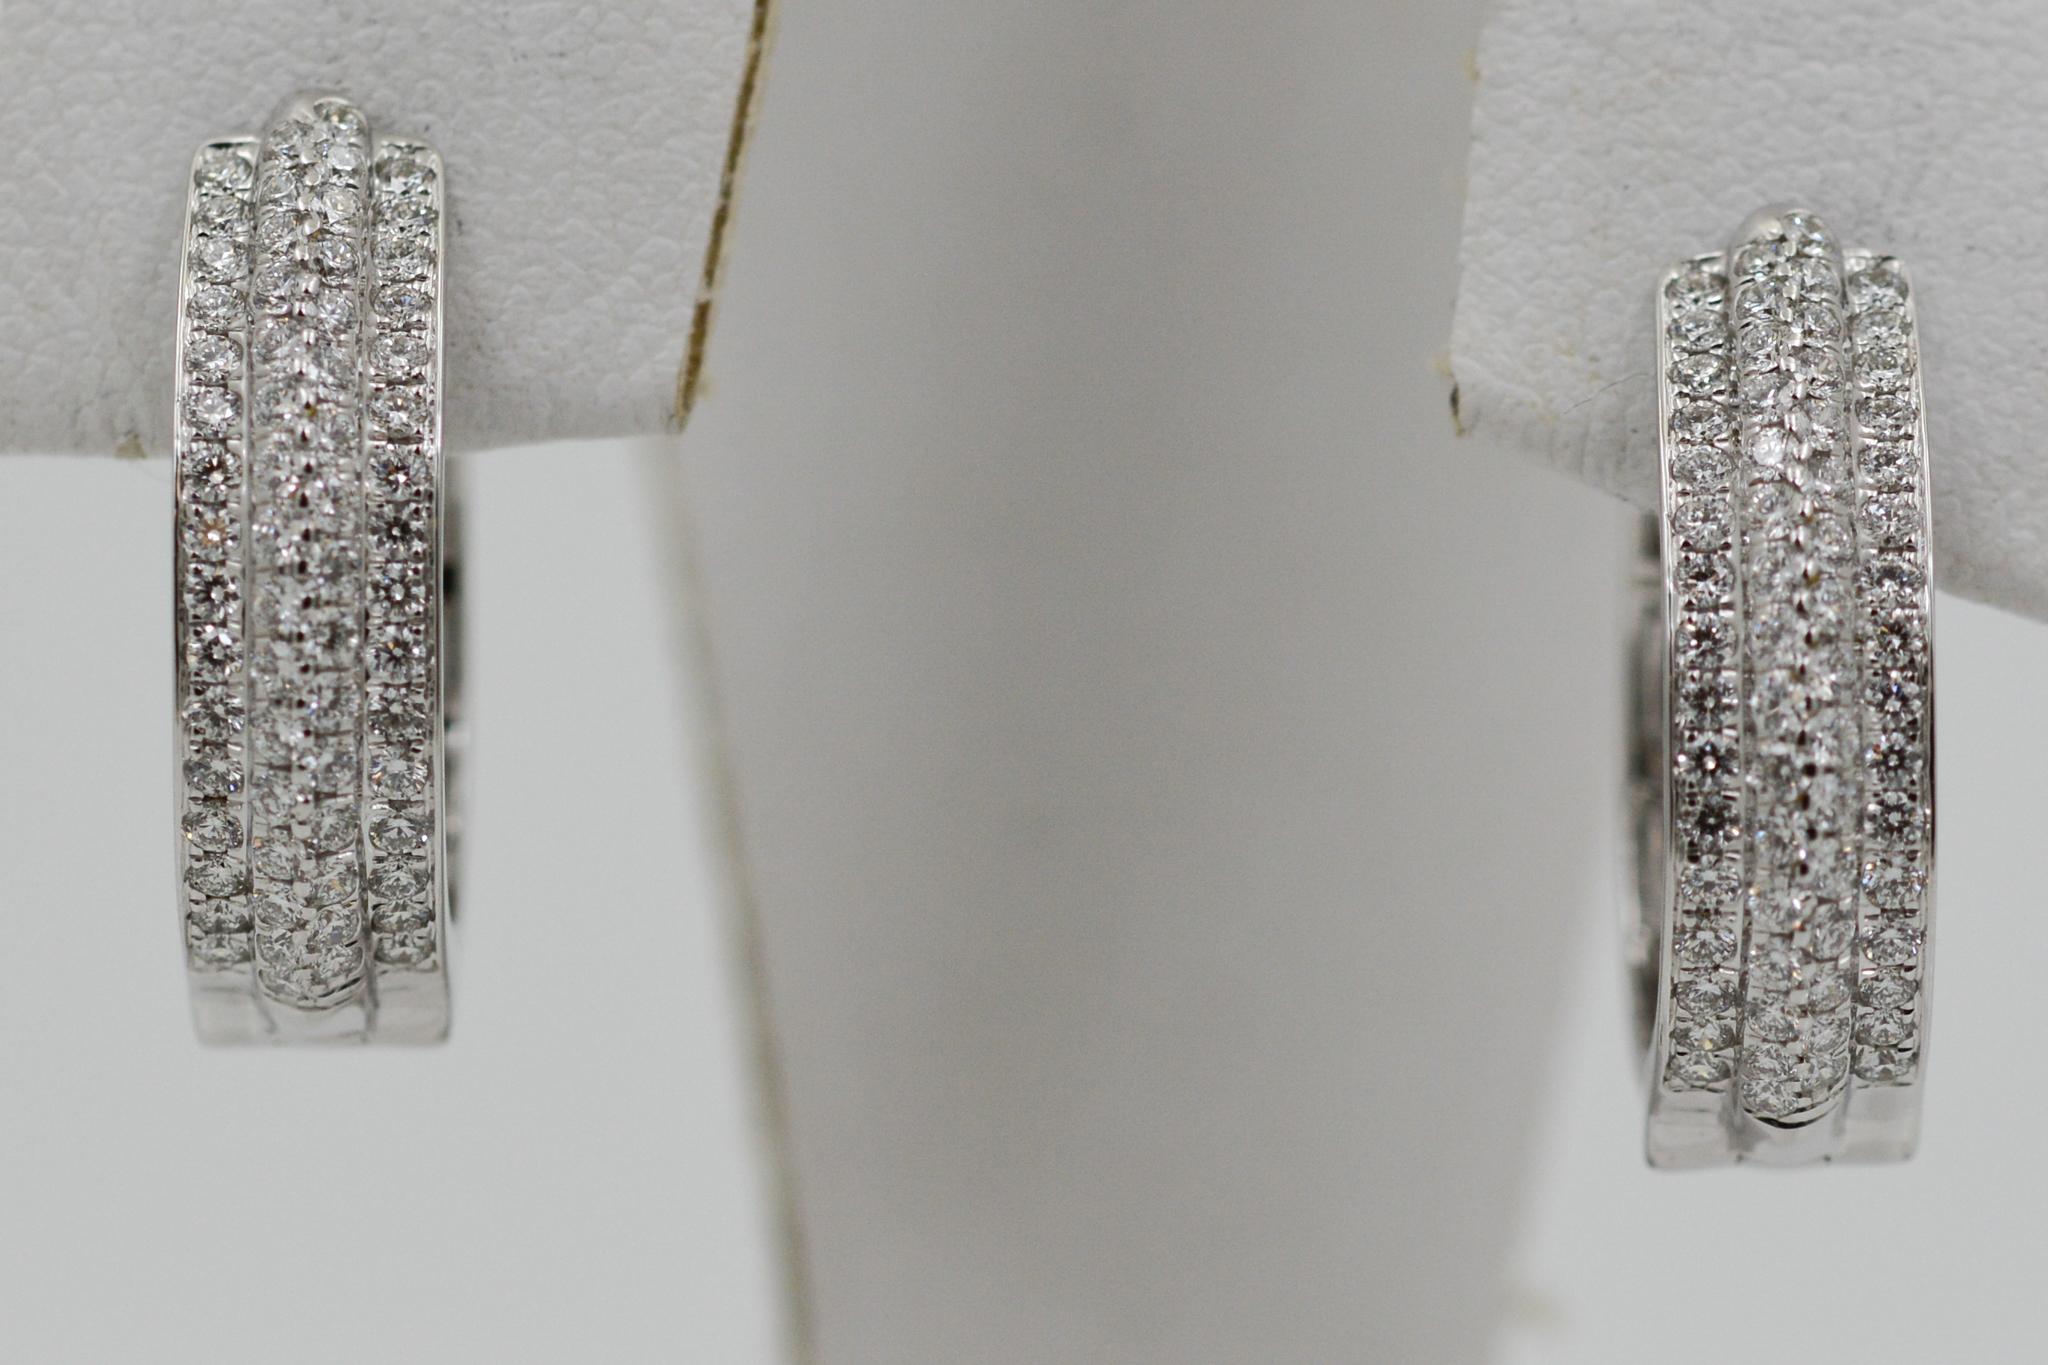 These 14 karat white gold hoop earrings feature 128 round brilliant cut diamonds weighing an approximate combined 1.28 carats with G coloring and VS clarity. 